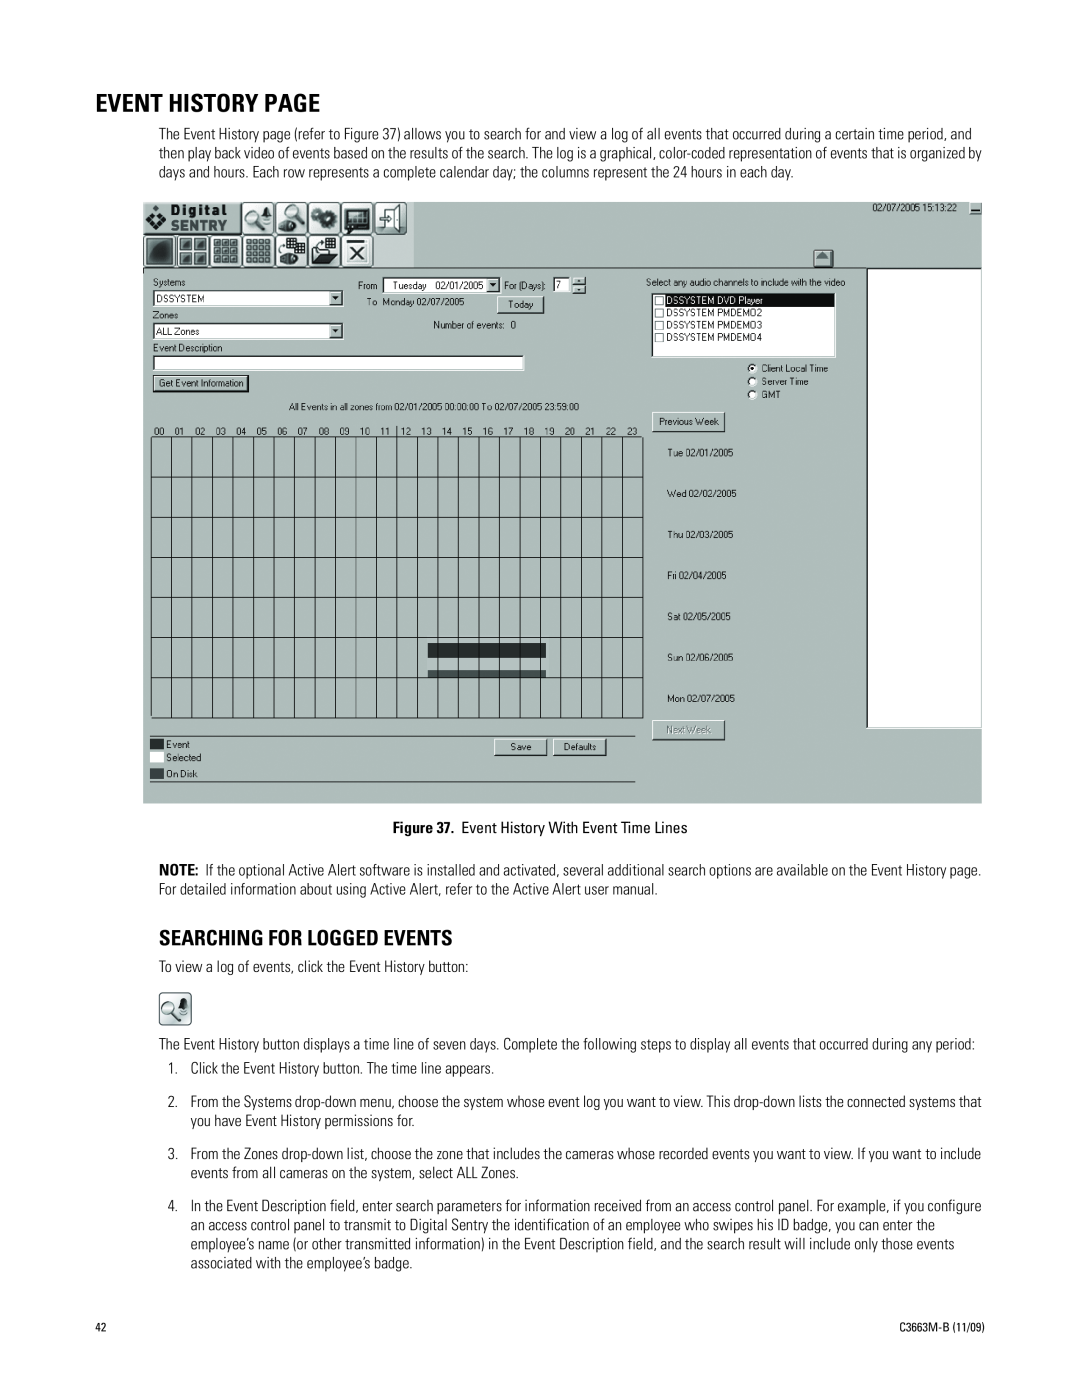 Pelco DS NVS manual Event History Page, Searching For Logged Events 